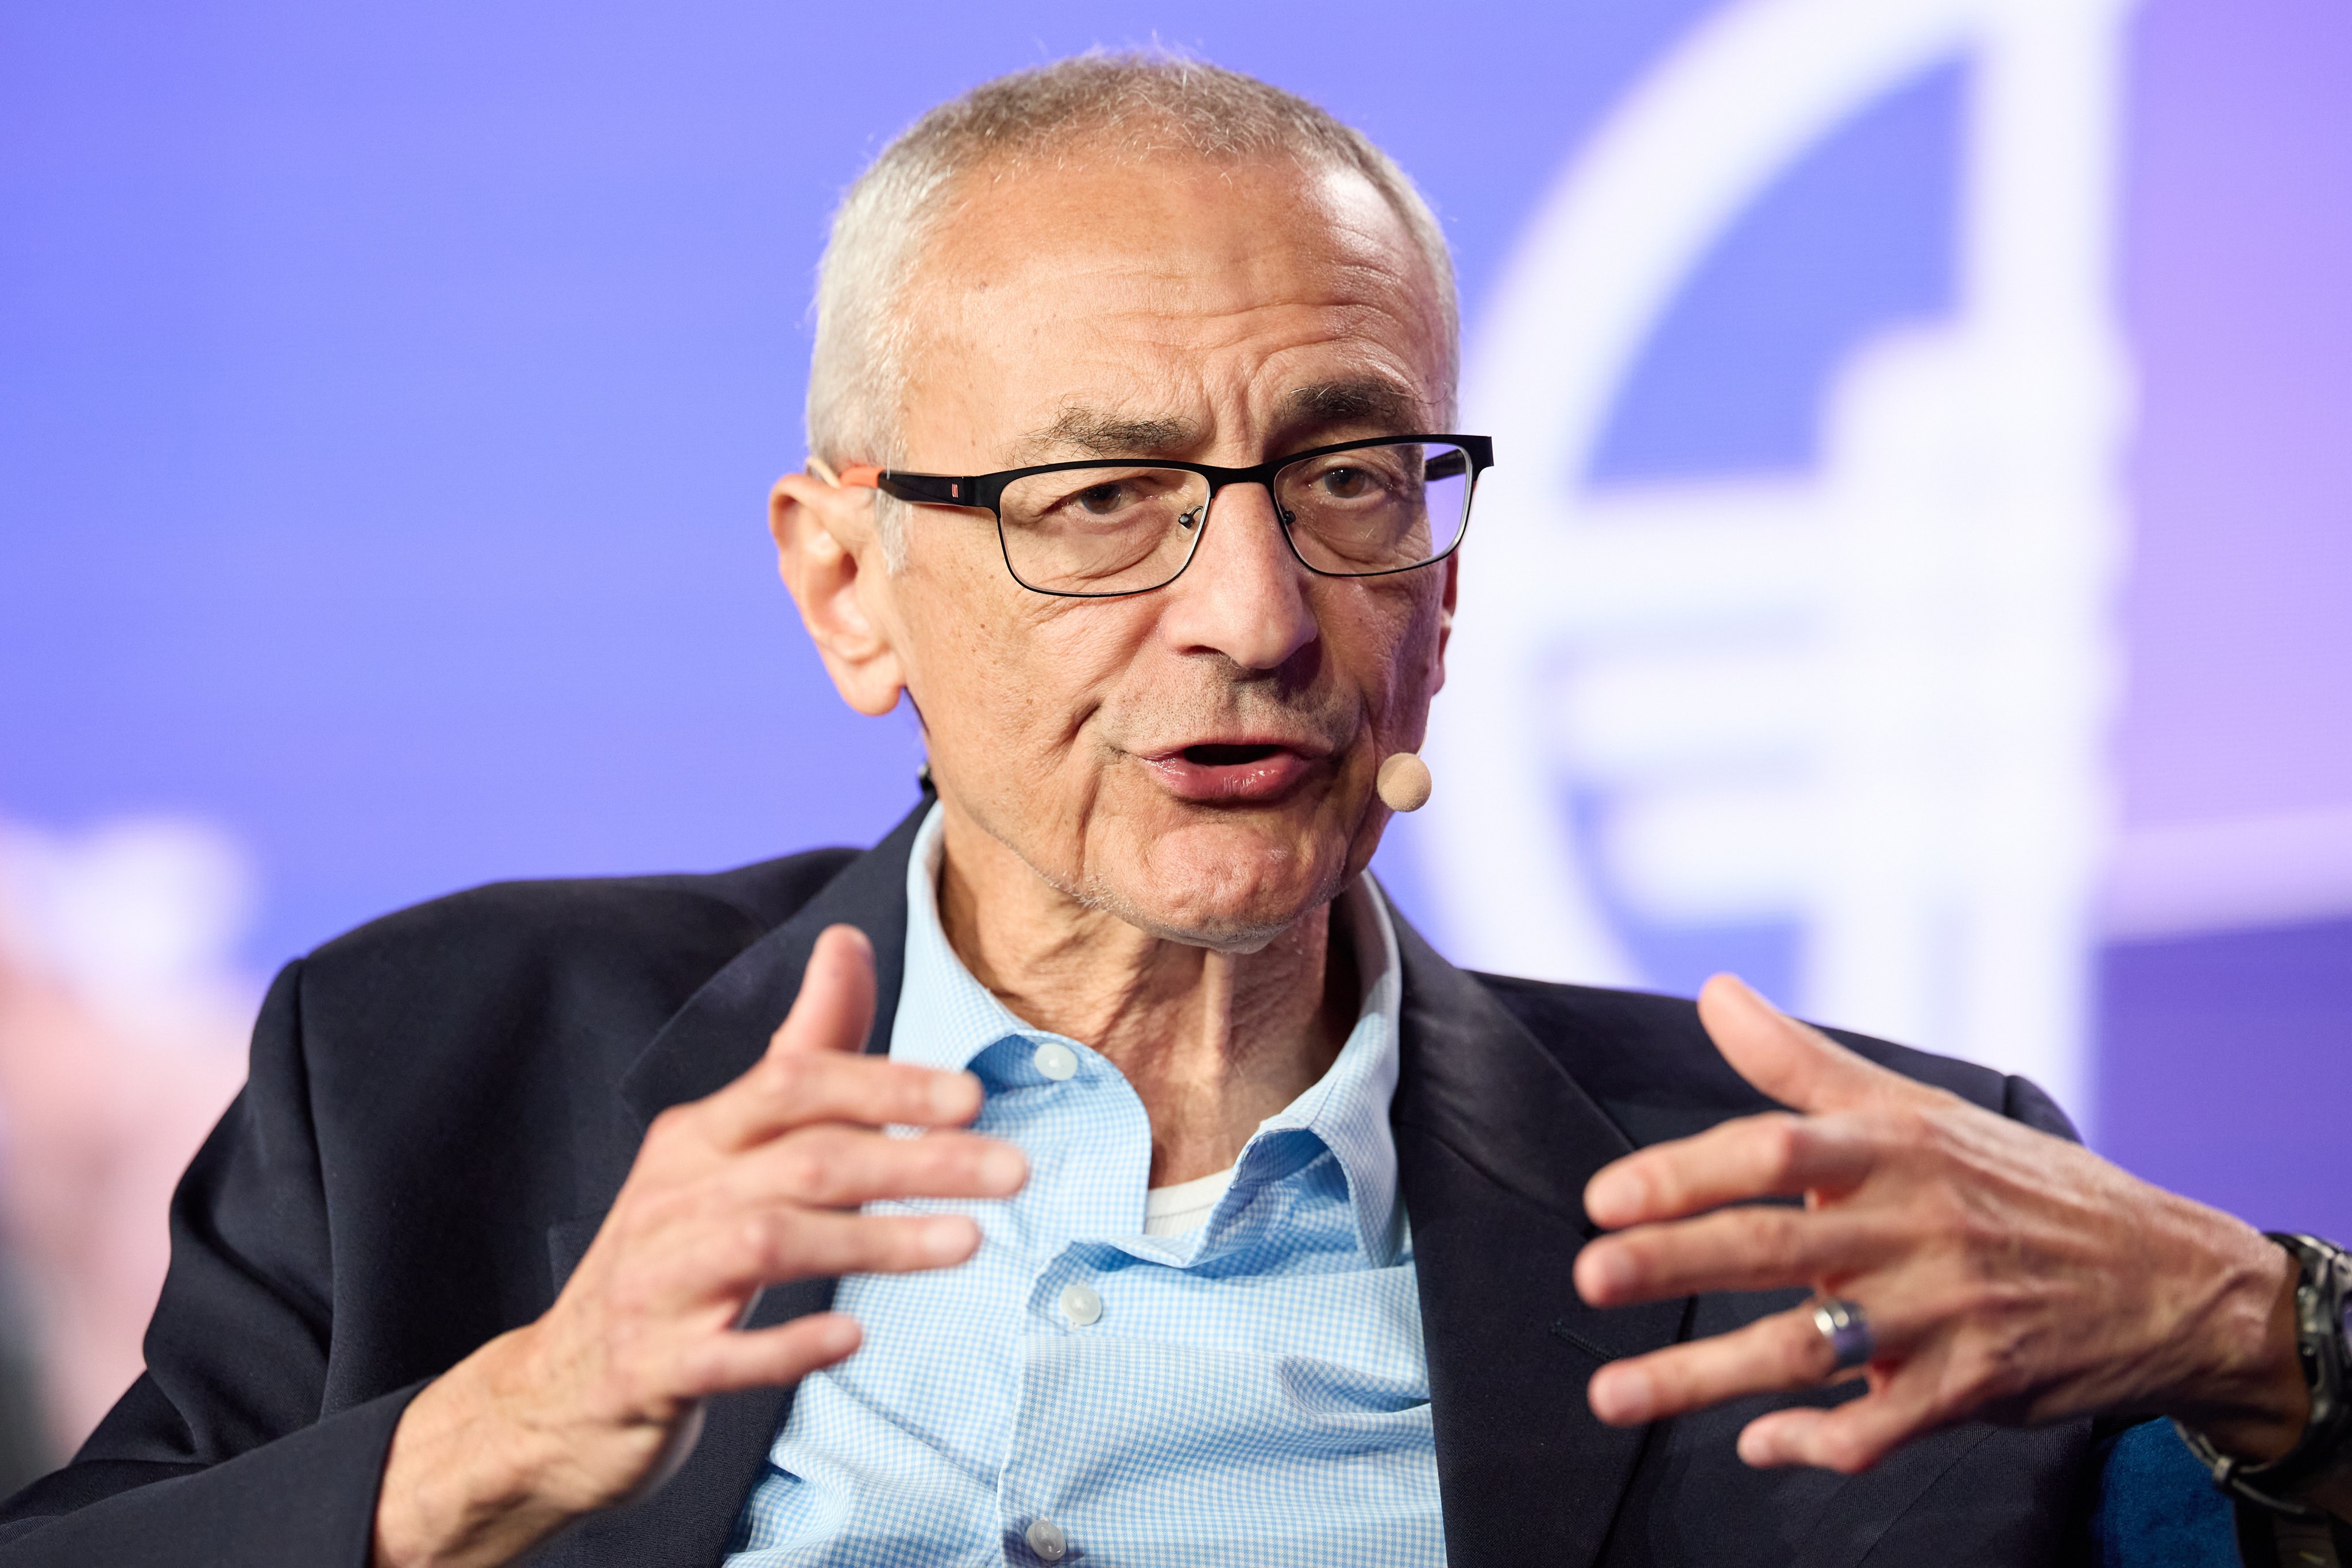 John Podesta, a former White House chief of staff, is co-chairing bilateral working group meetings on climate change with China’s special envoy Liu Zhenmin. Photo: EPA-EFE